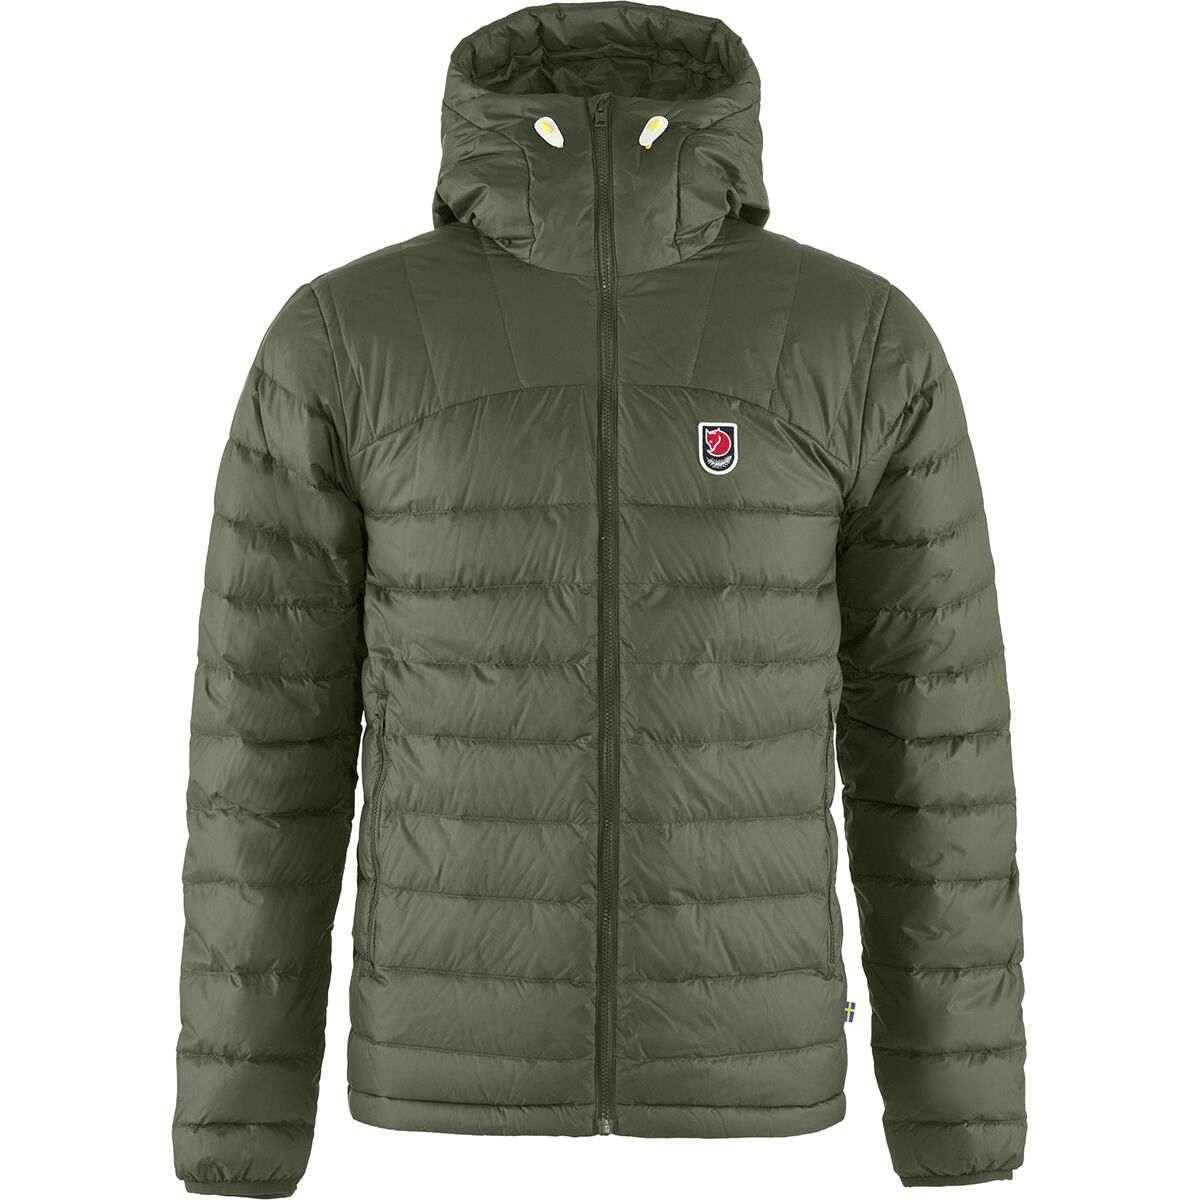 Expedition Pack Down Hooded Jacket - Men